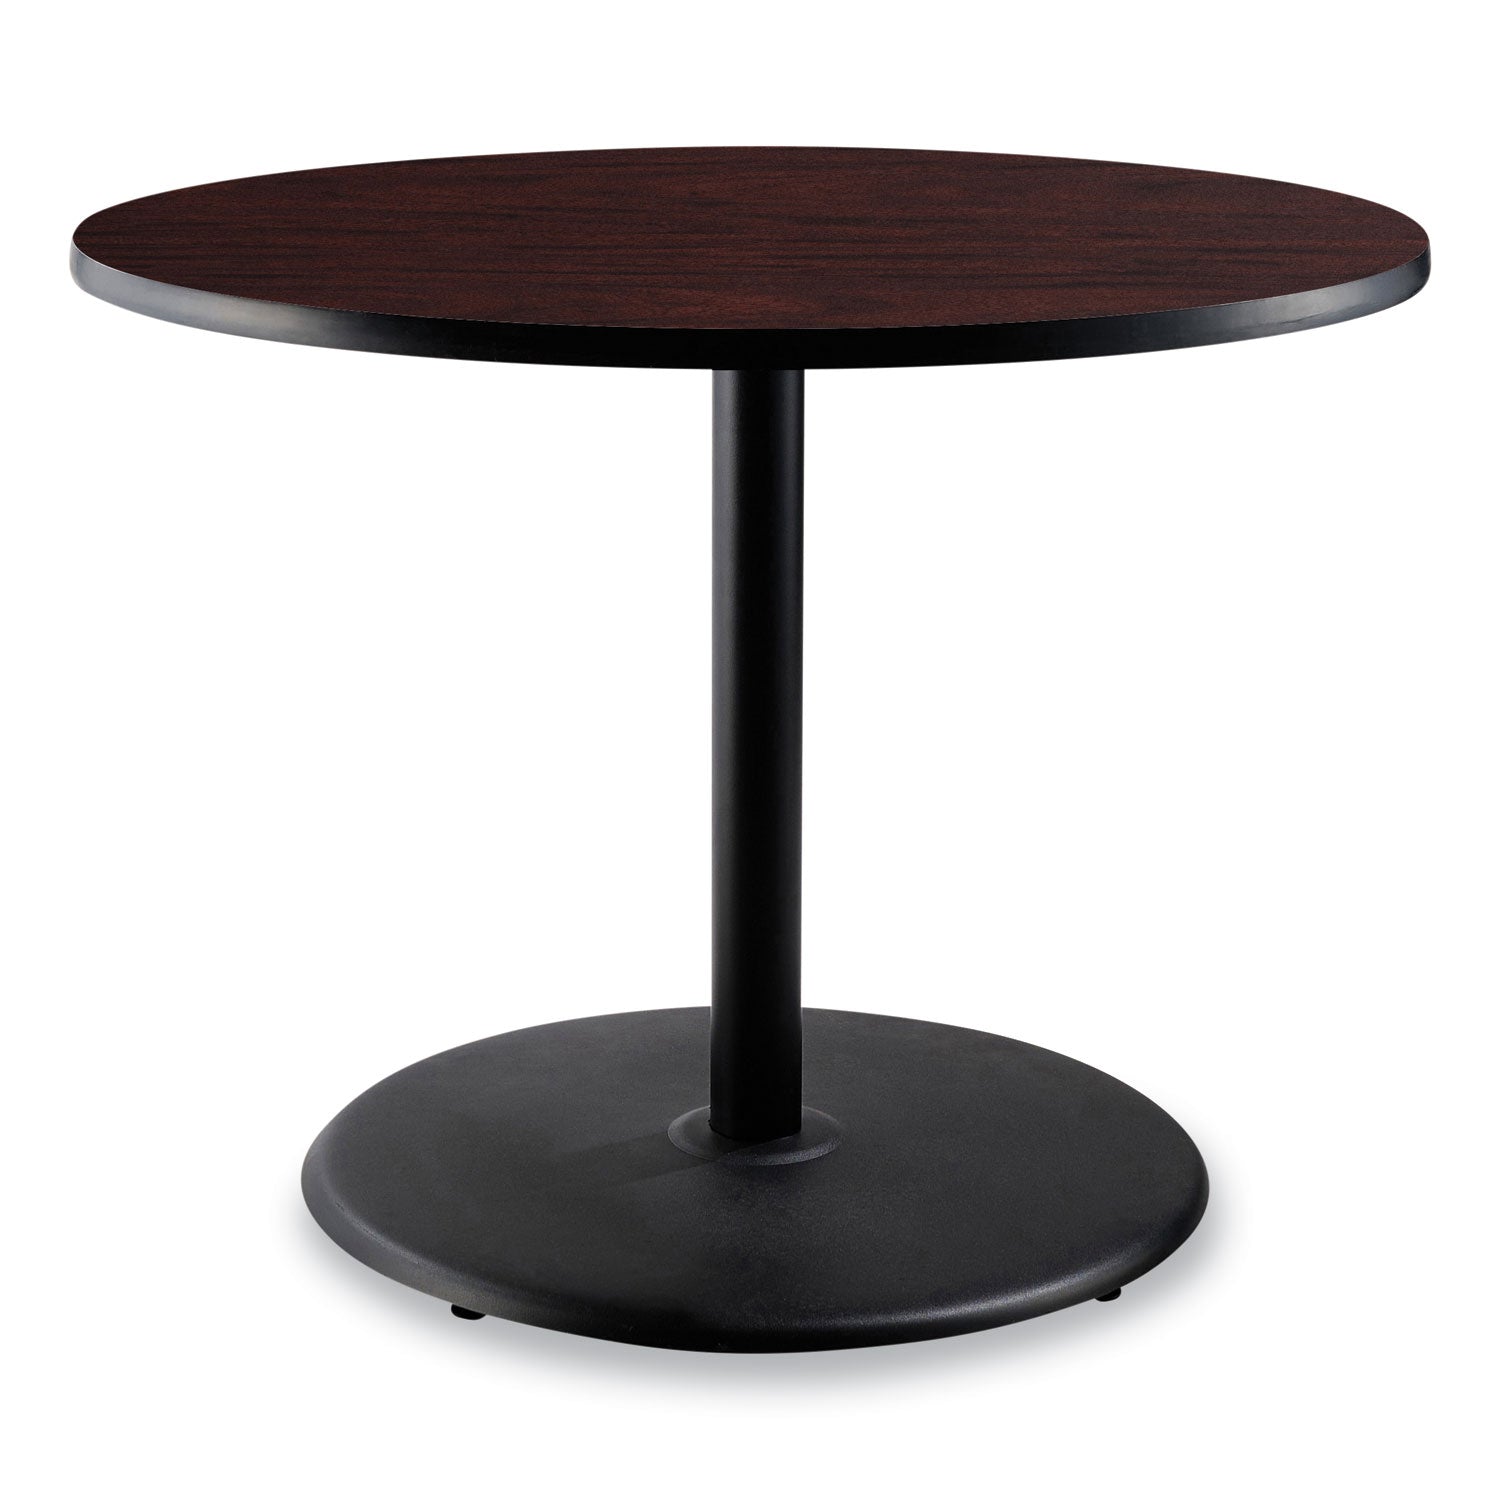 cafe-table-36-diameter-x-30h-round-top-base-mahogany-top-black-base-ships-in-7-10-business-days_npsct13636rd1my - 1